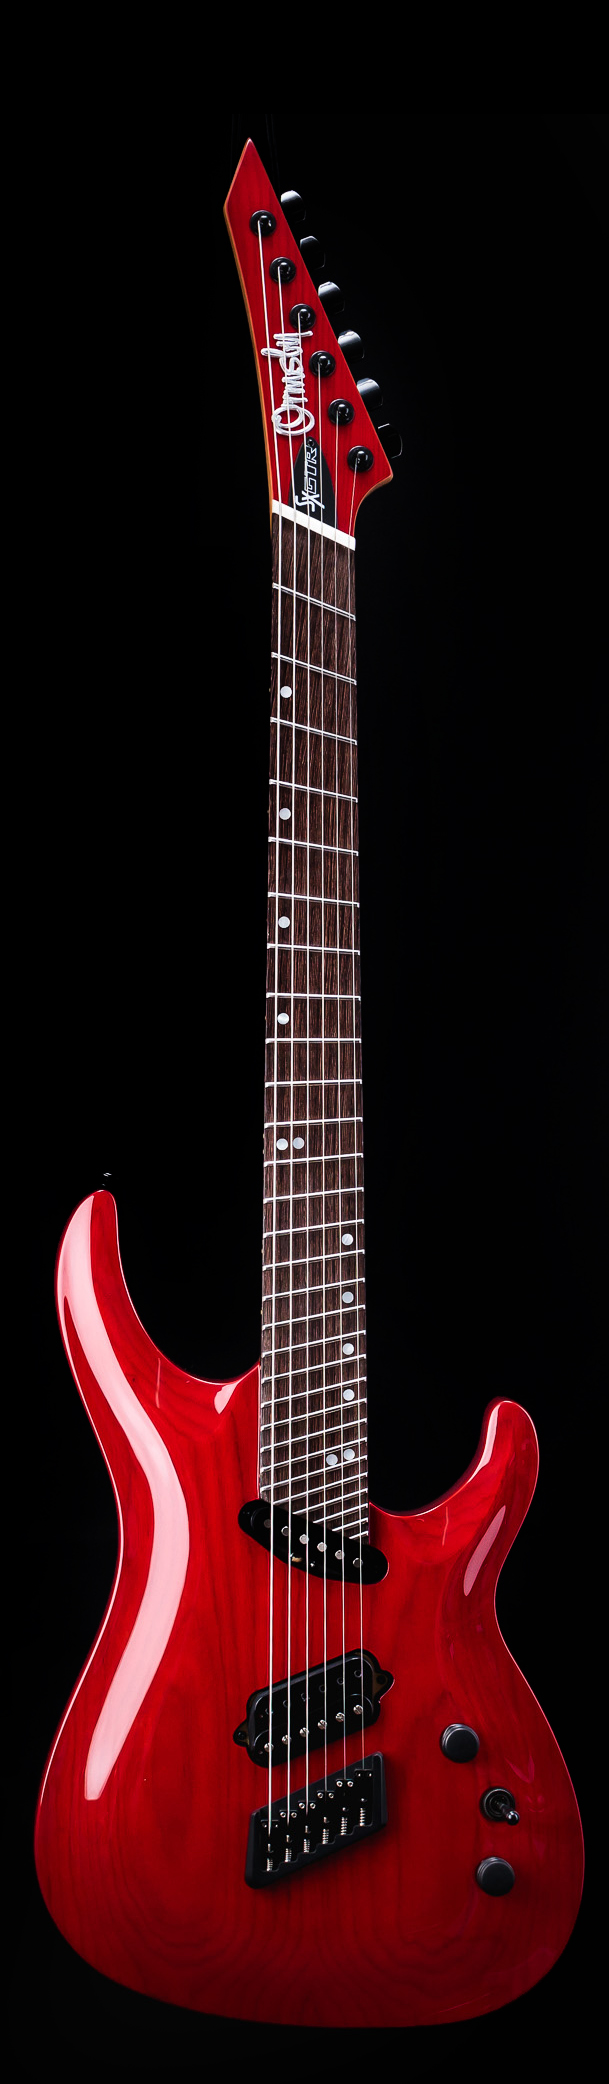 Ormsby Guitars fanned fret multiscale guitar